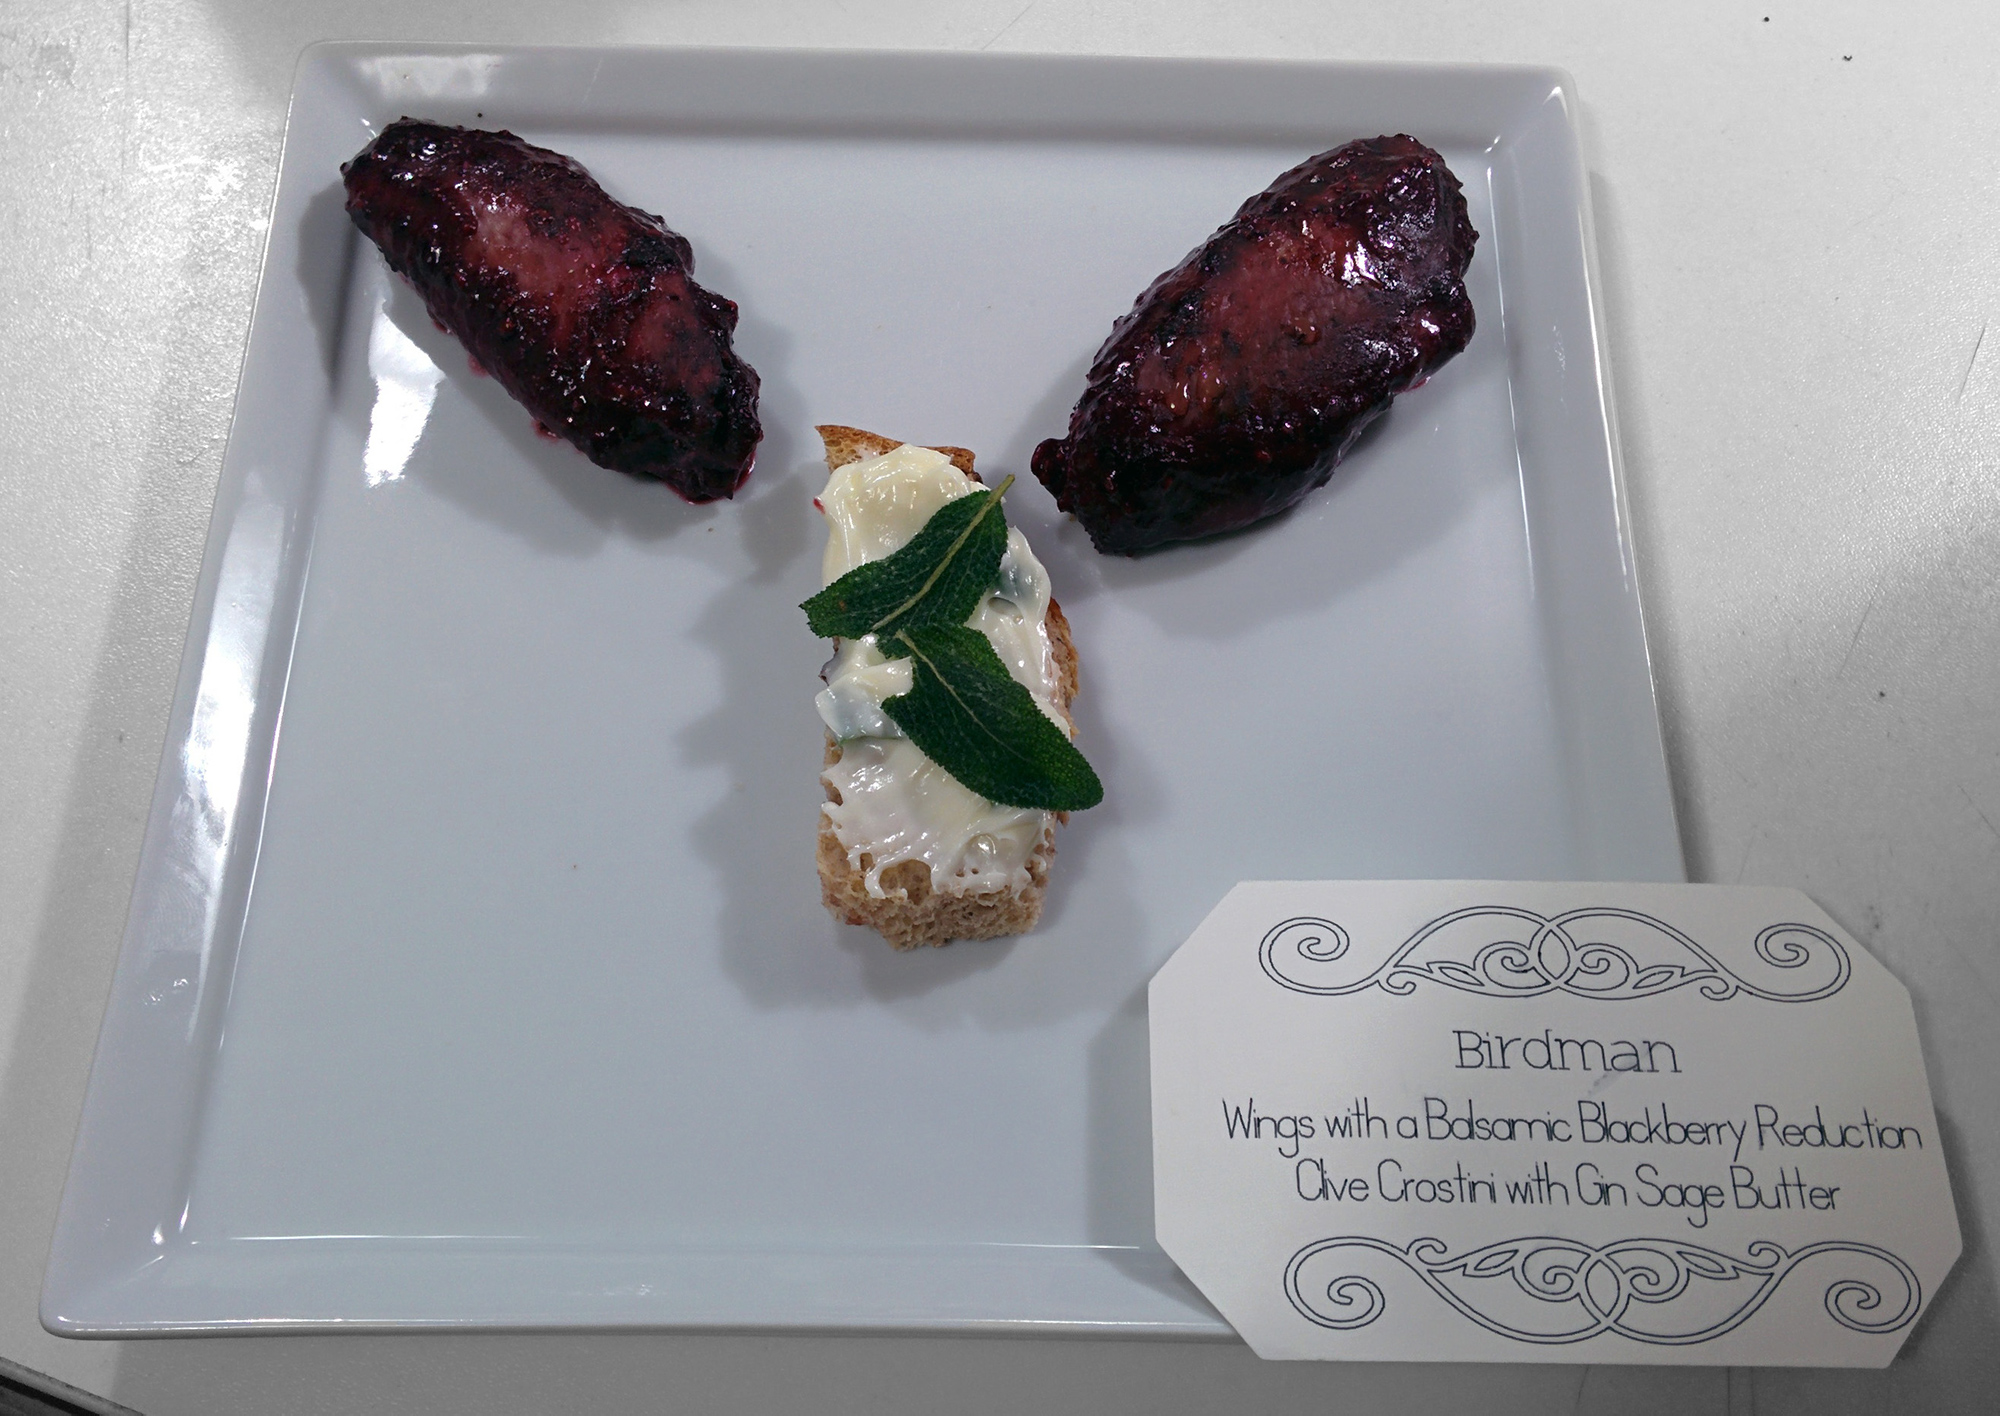 Birdman: Wings with balsamic blackberry reduction, olive crostini with gin sage butter